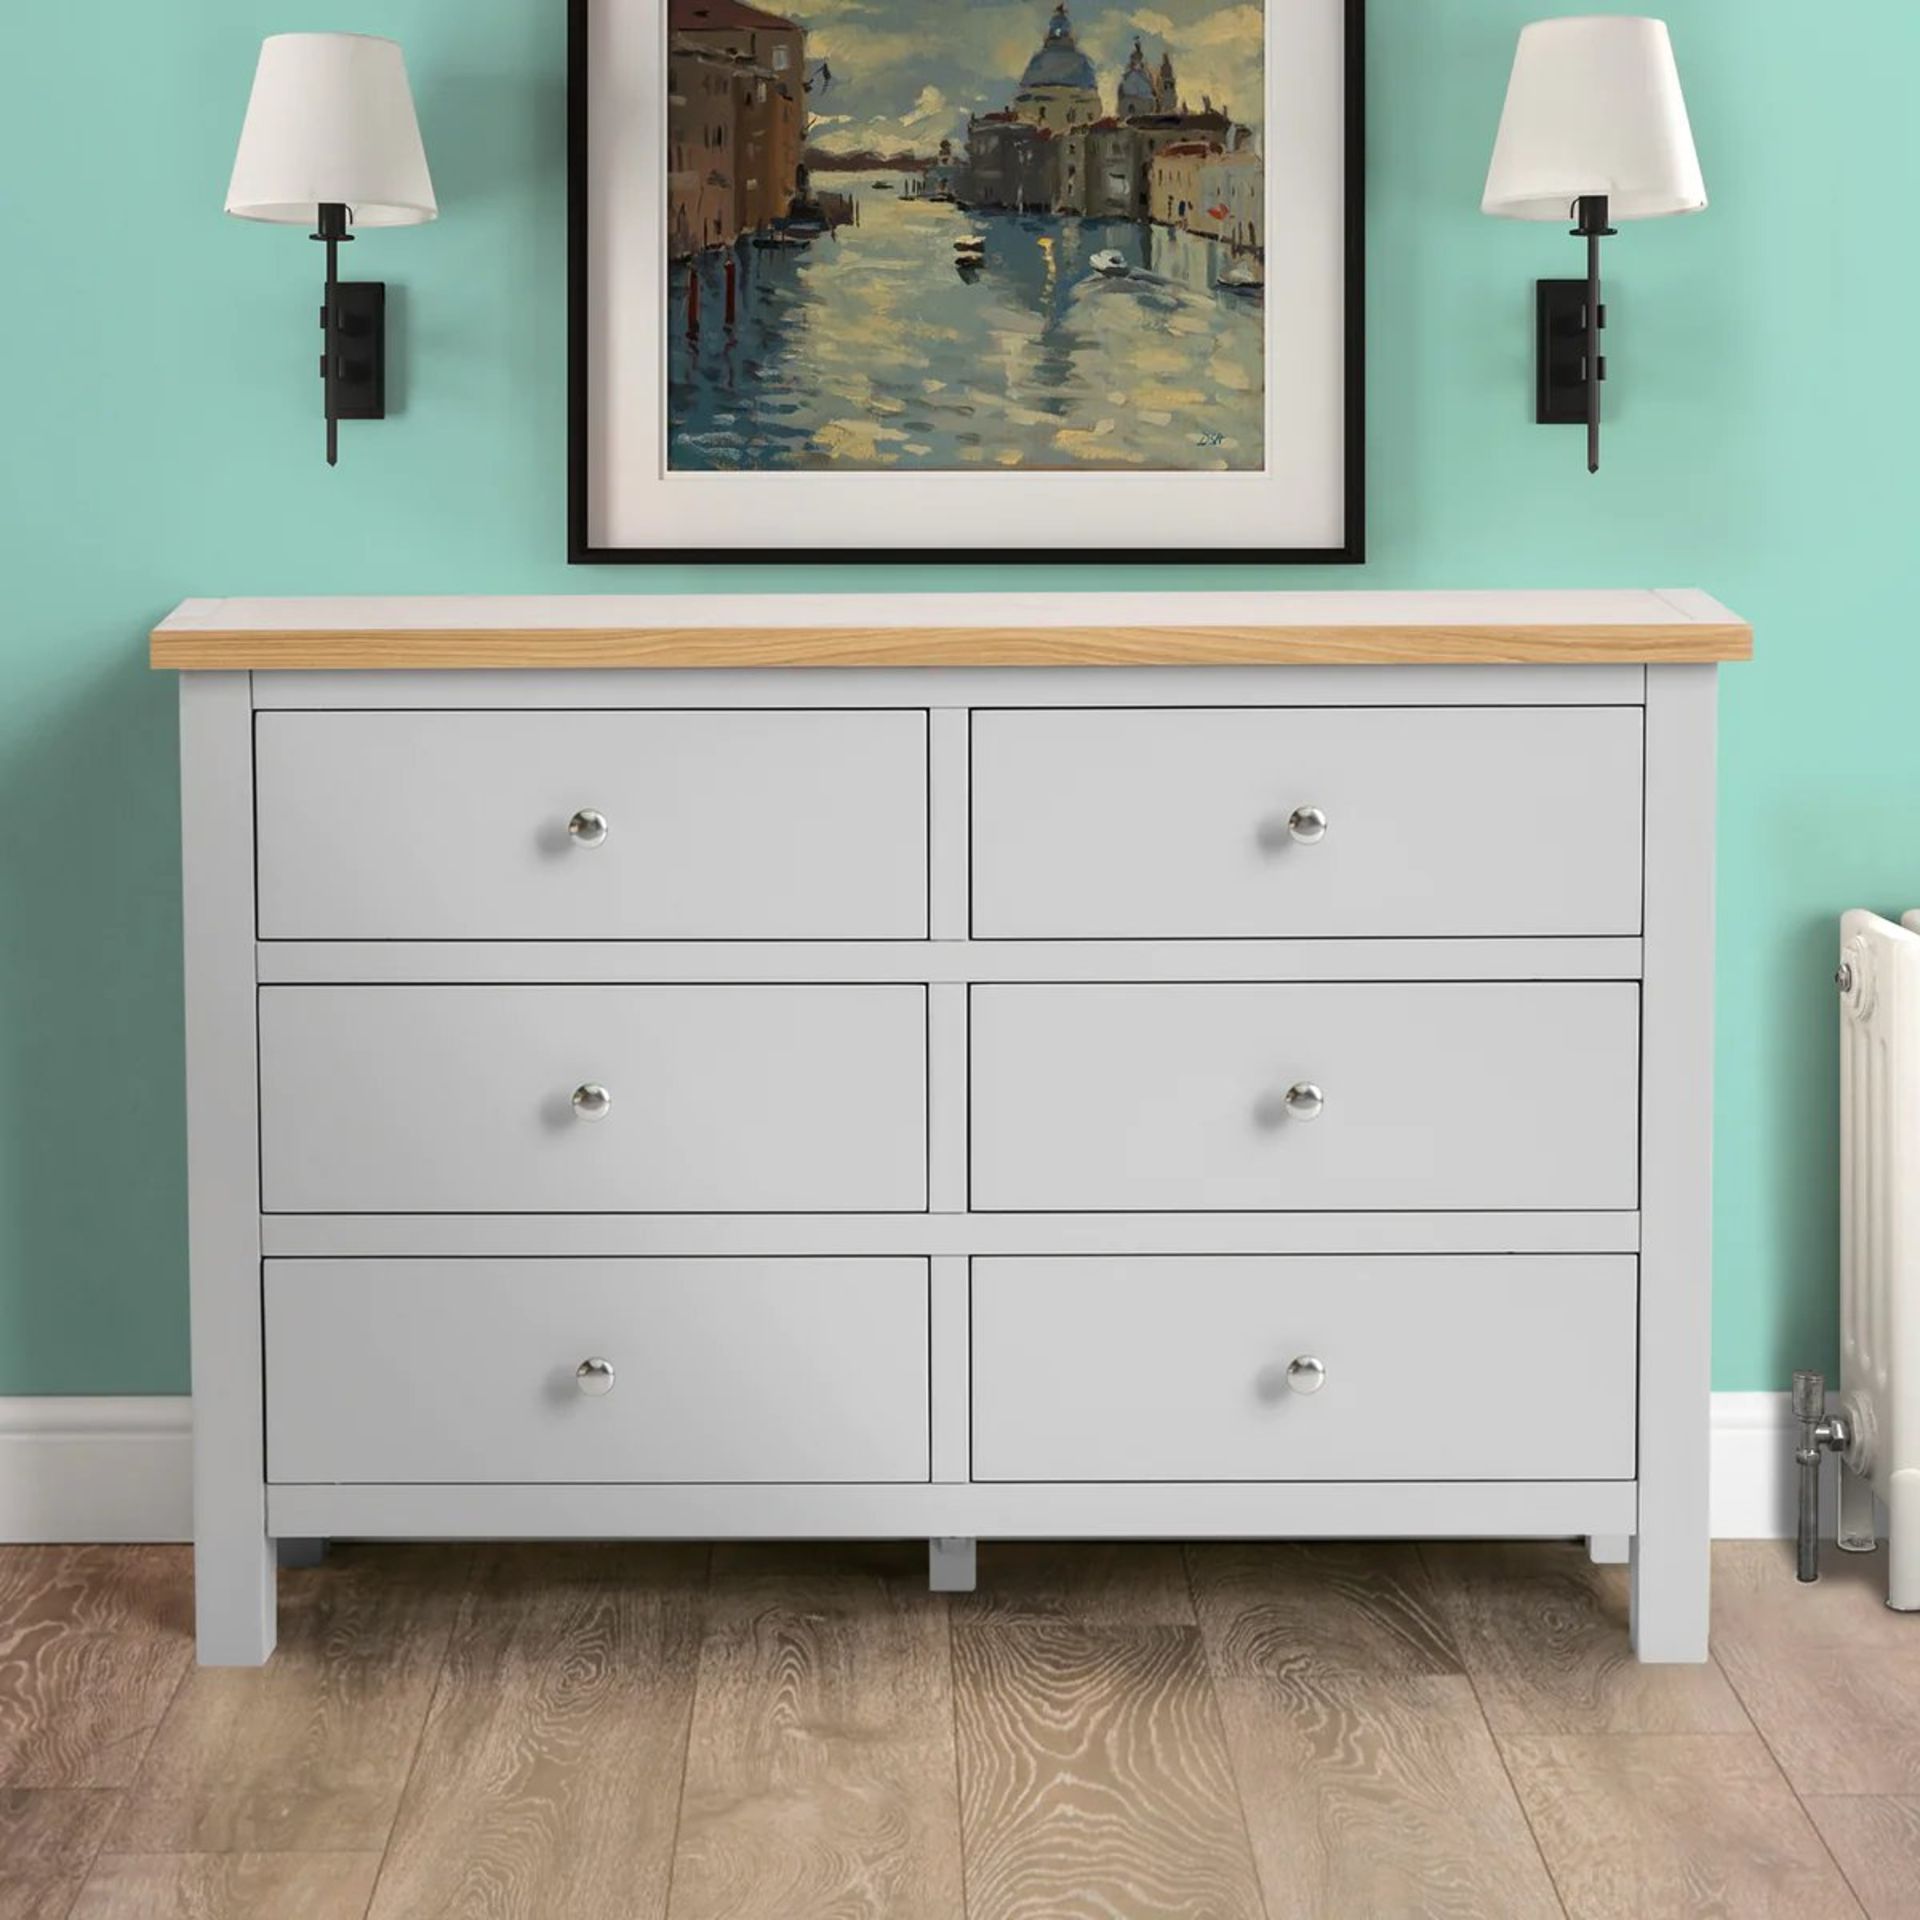 Farrow 6 Drawer Chest. RRP £469.99. (3230-P1A) This chest of drawers will bring plenty of storage to